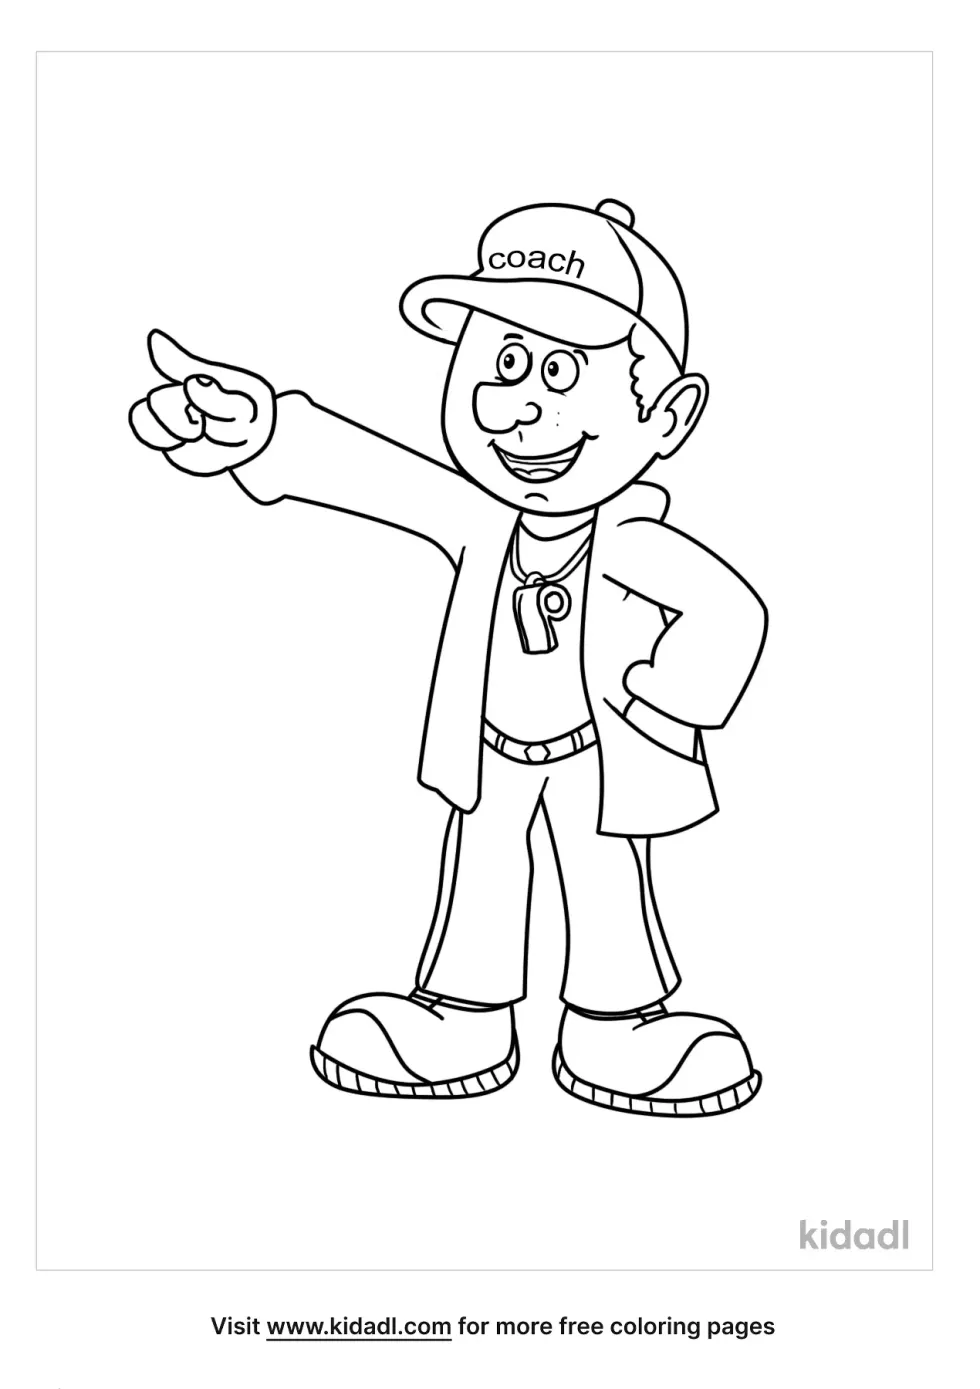 Coaching Coloring Page